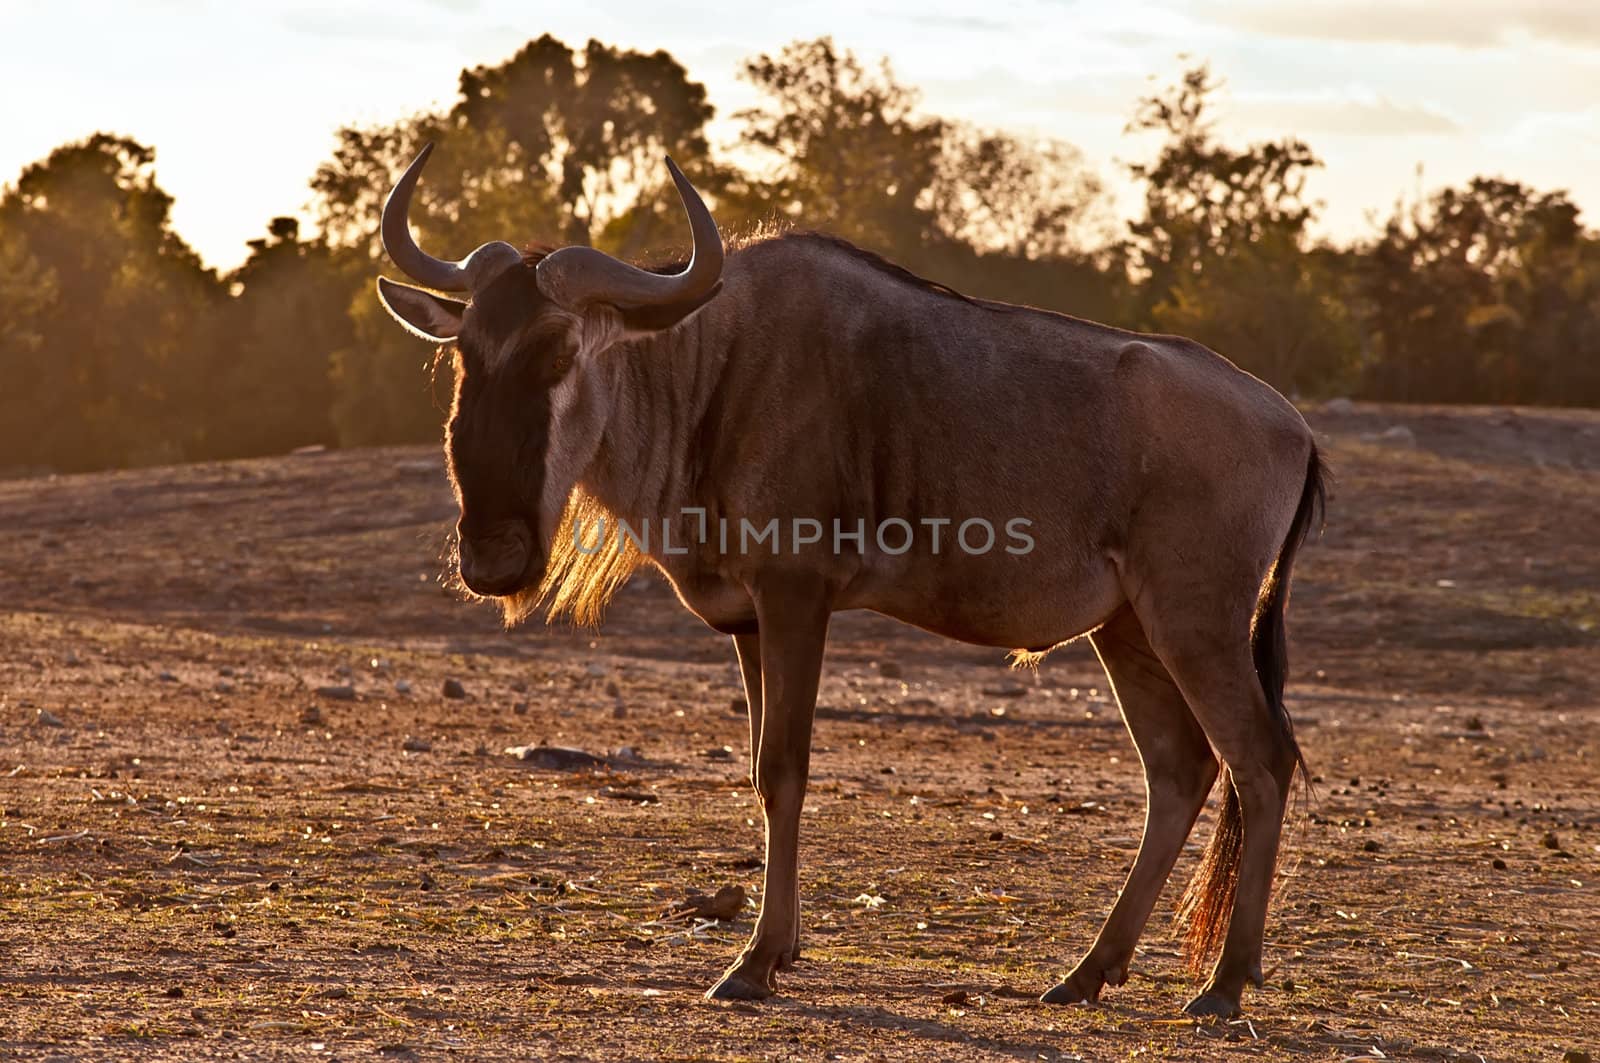 Wildebeest , also called the gnu is an antelope of the genus Connochaetes.